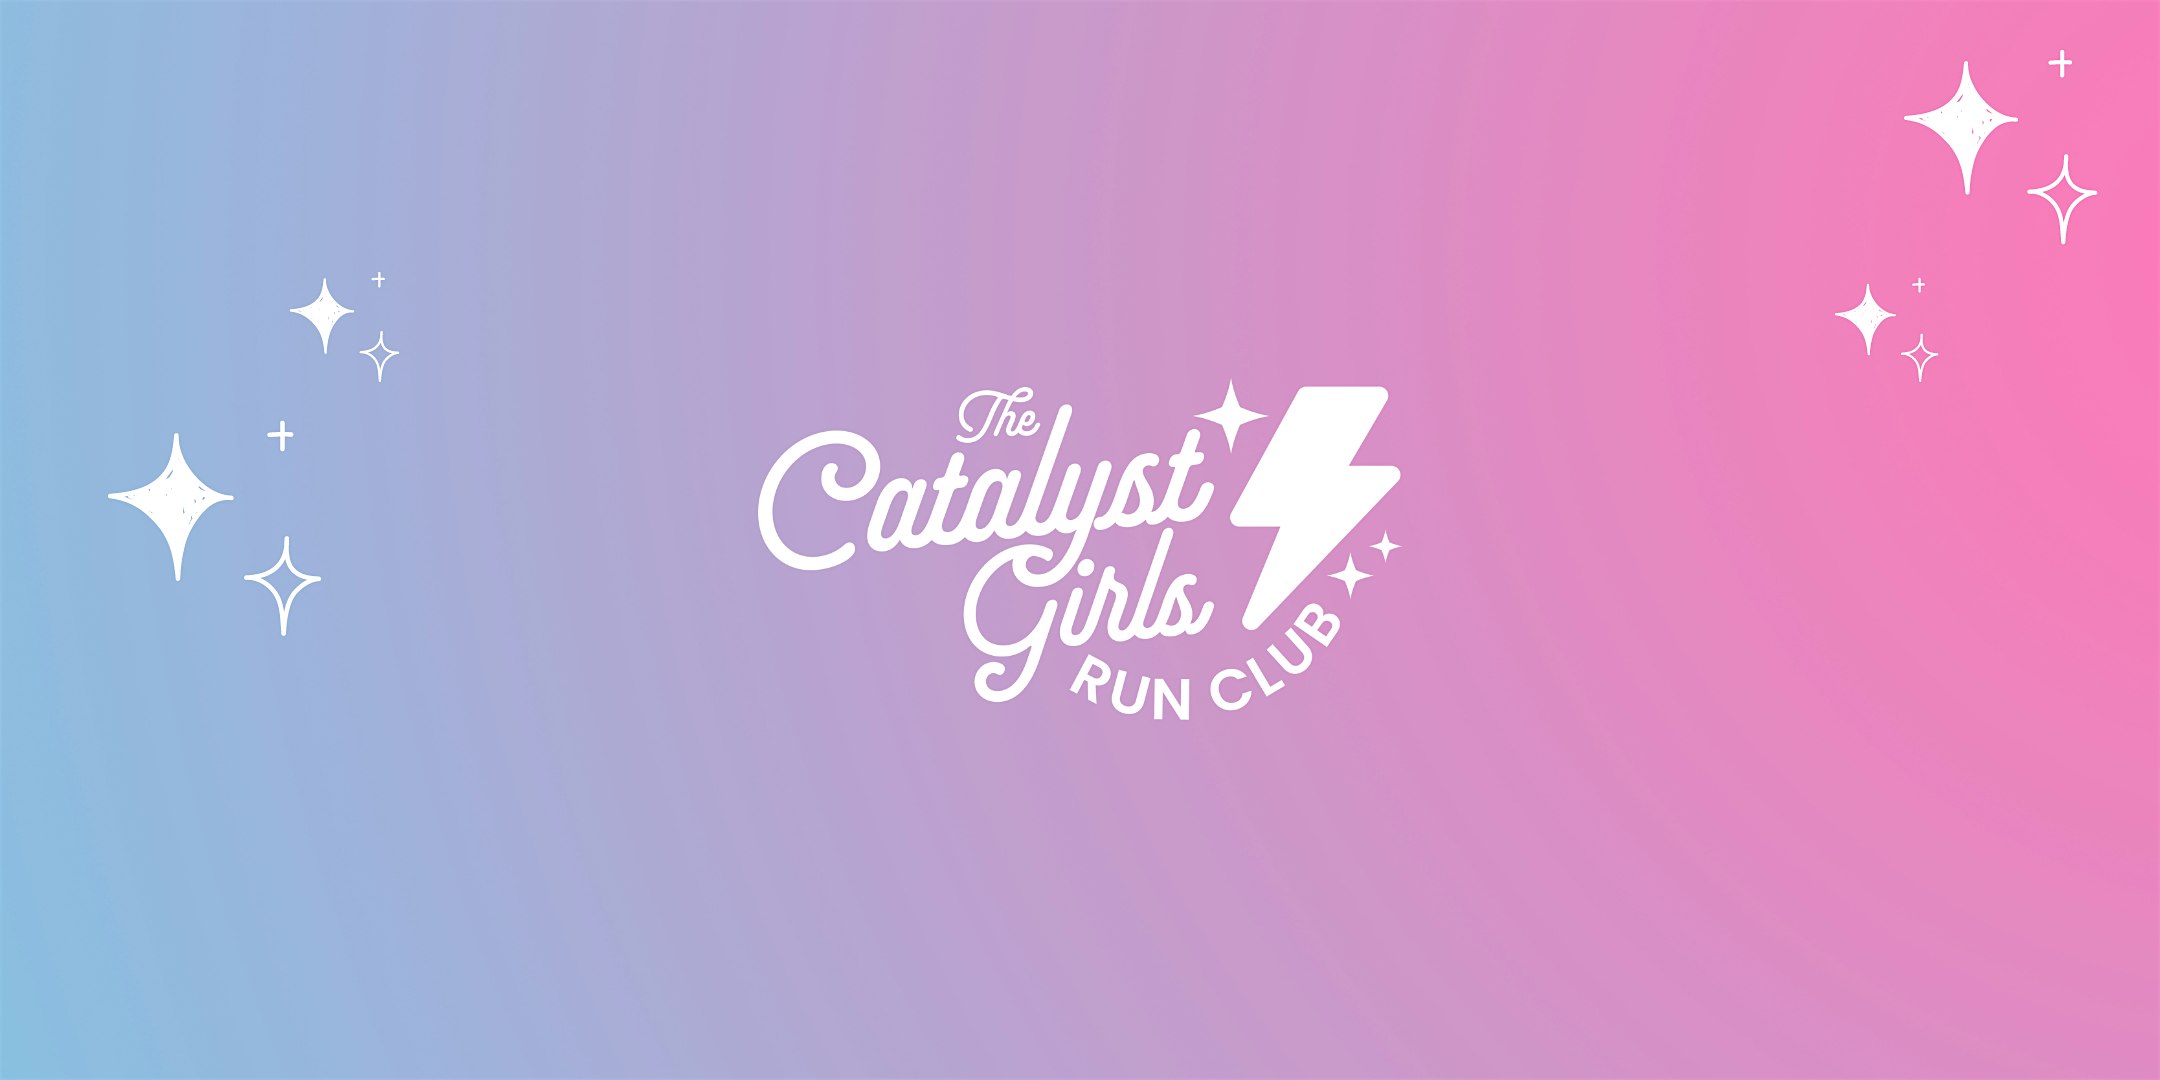 The Catalyst Girls Run Club - Allen - Special Yoga Session!